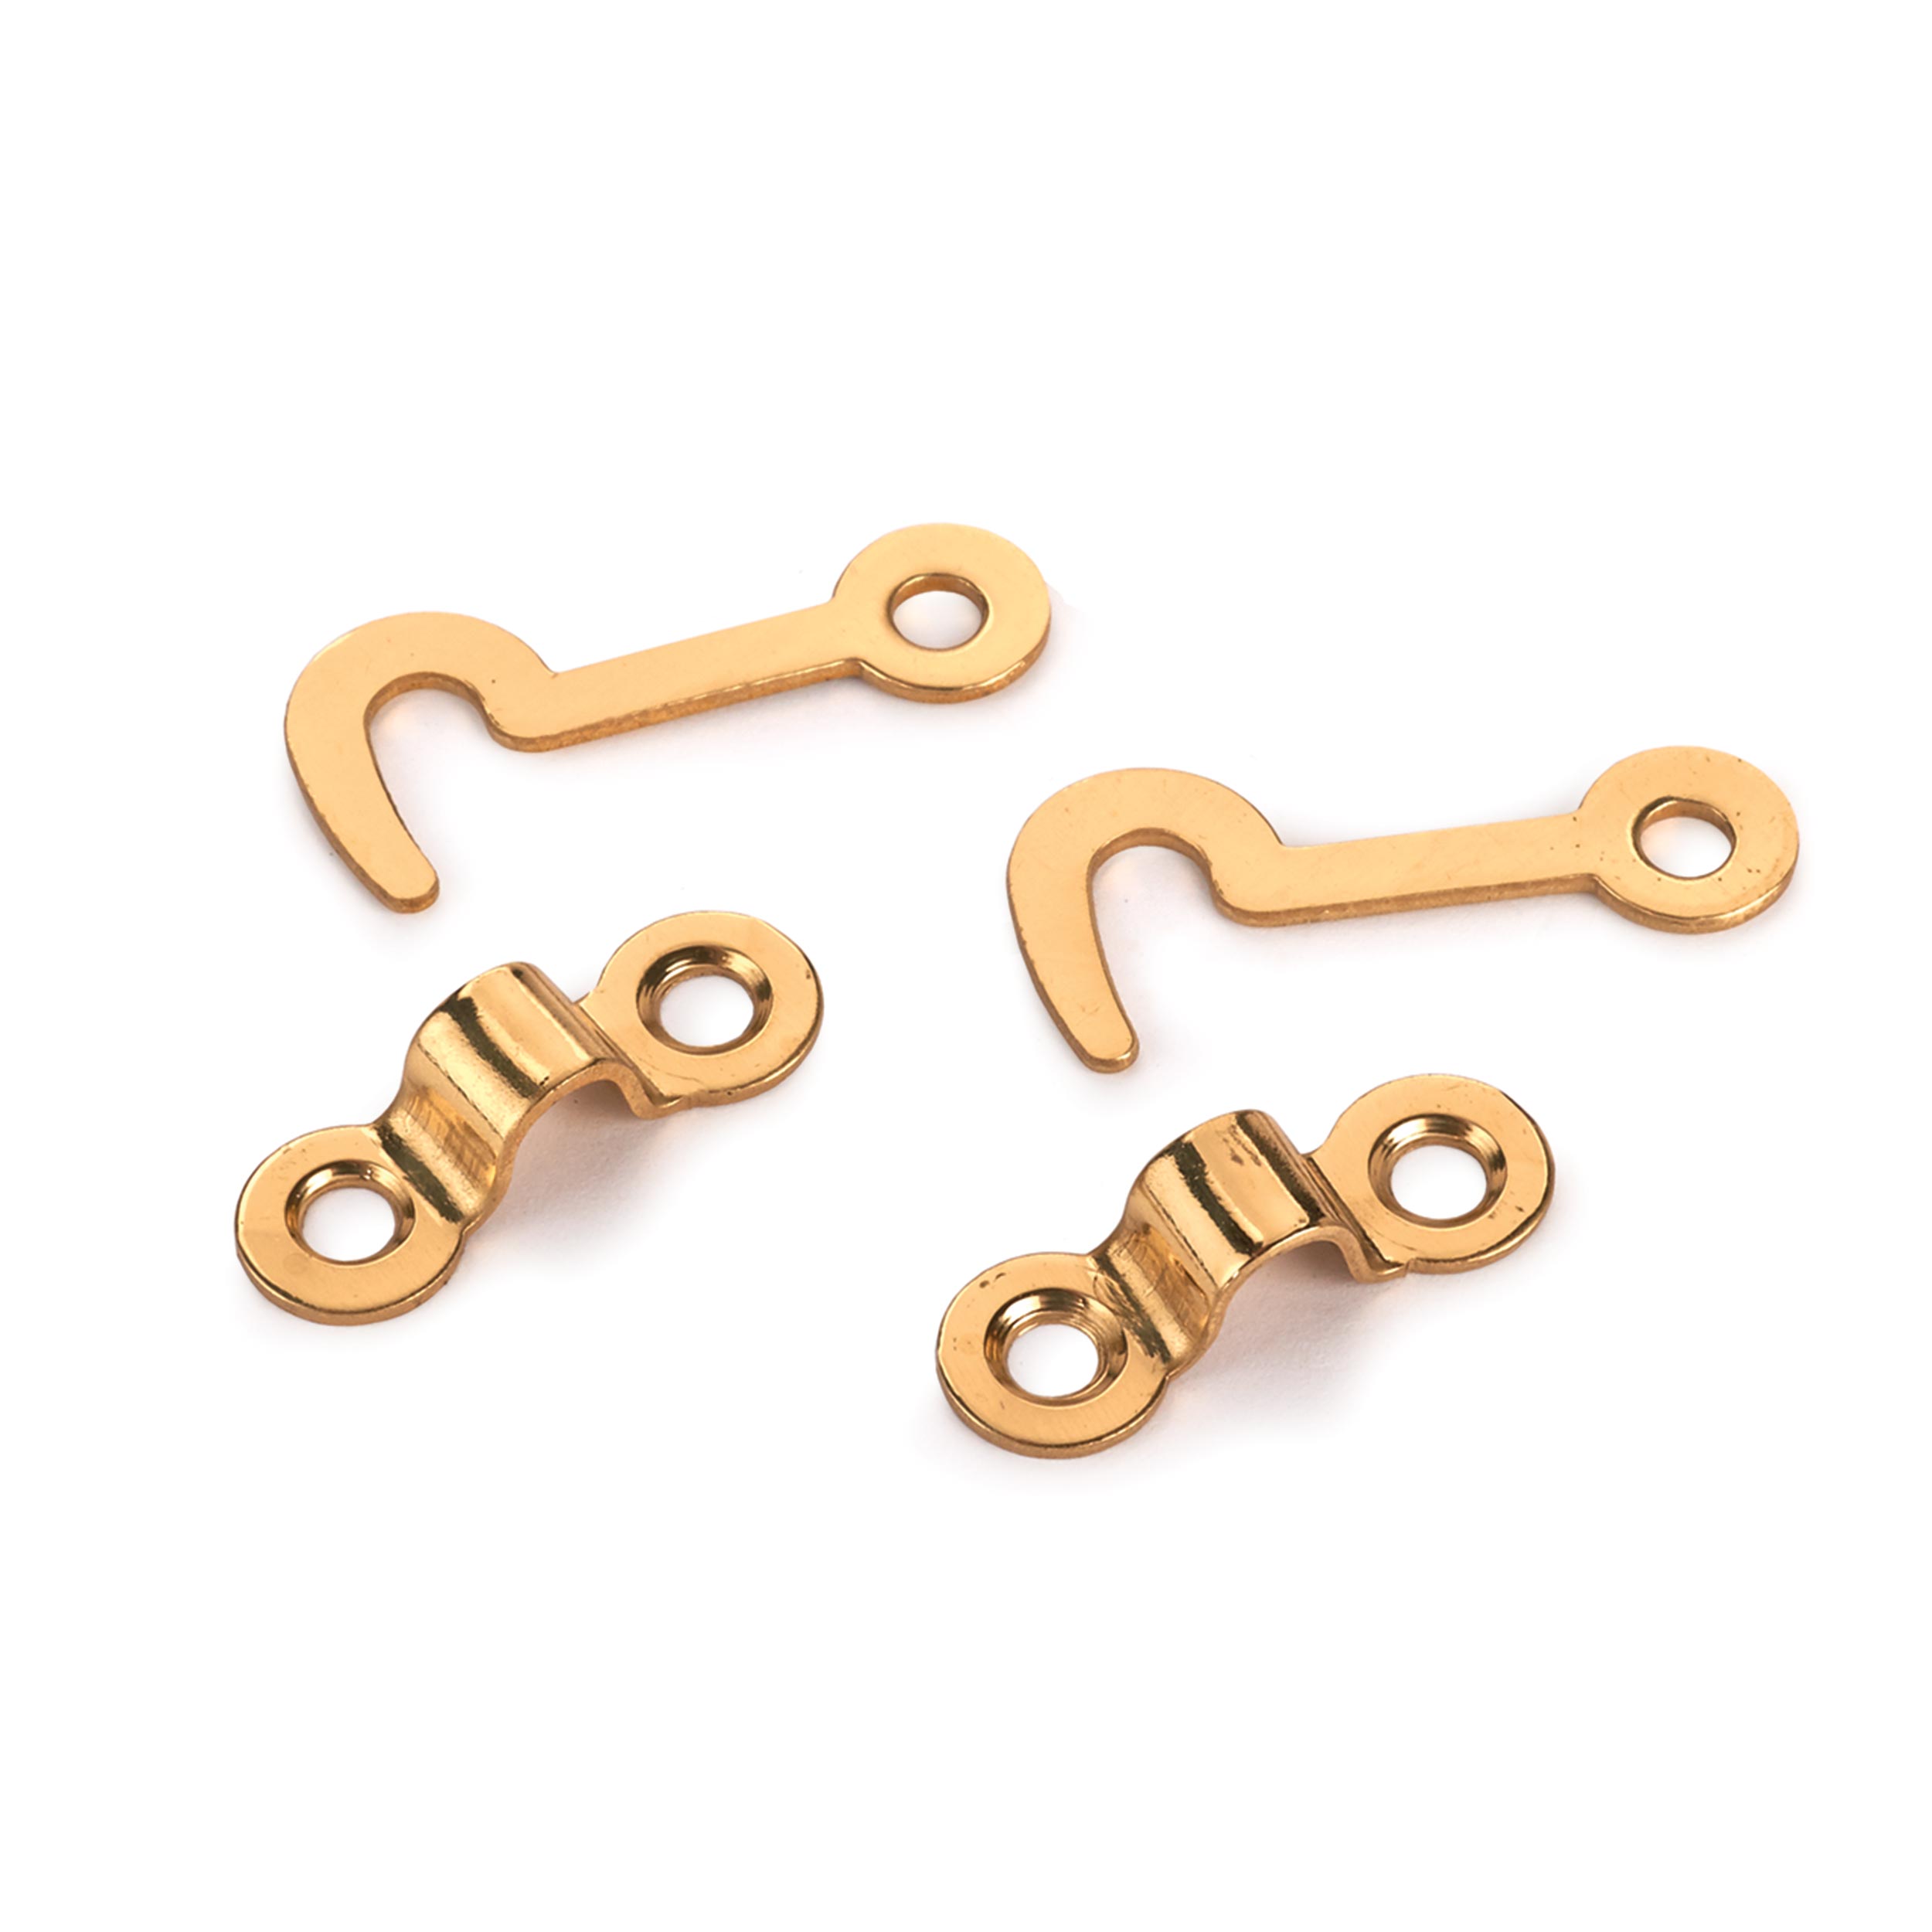 Solid Brass Miniature Hook And Staples Latch Hinge W/fasteners, 2 Pack